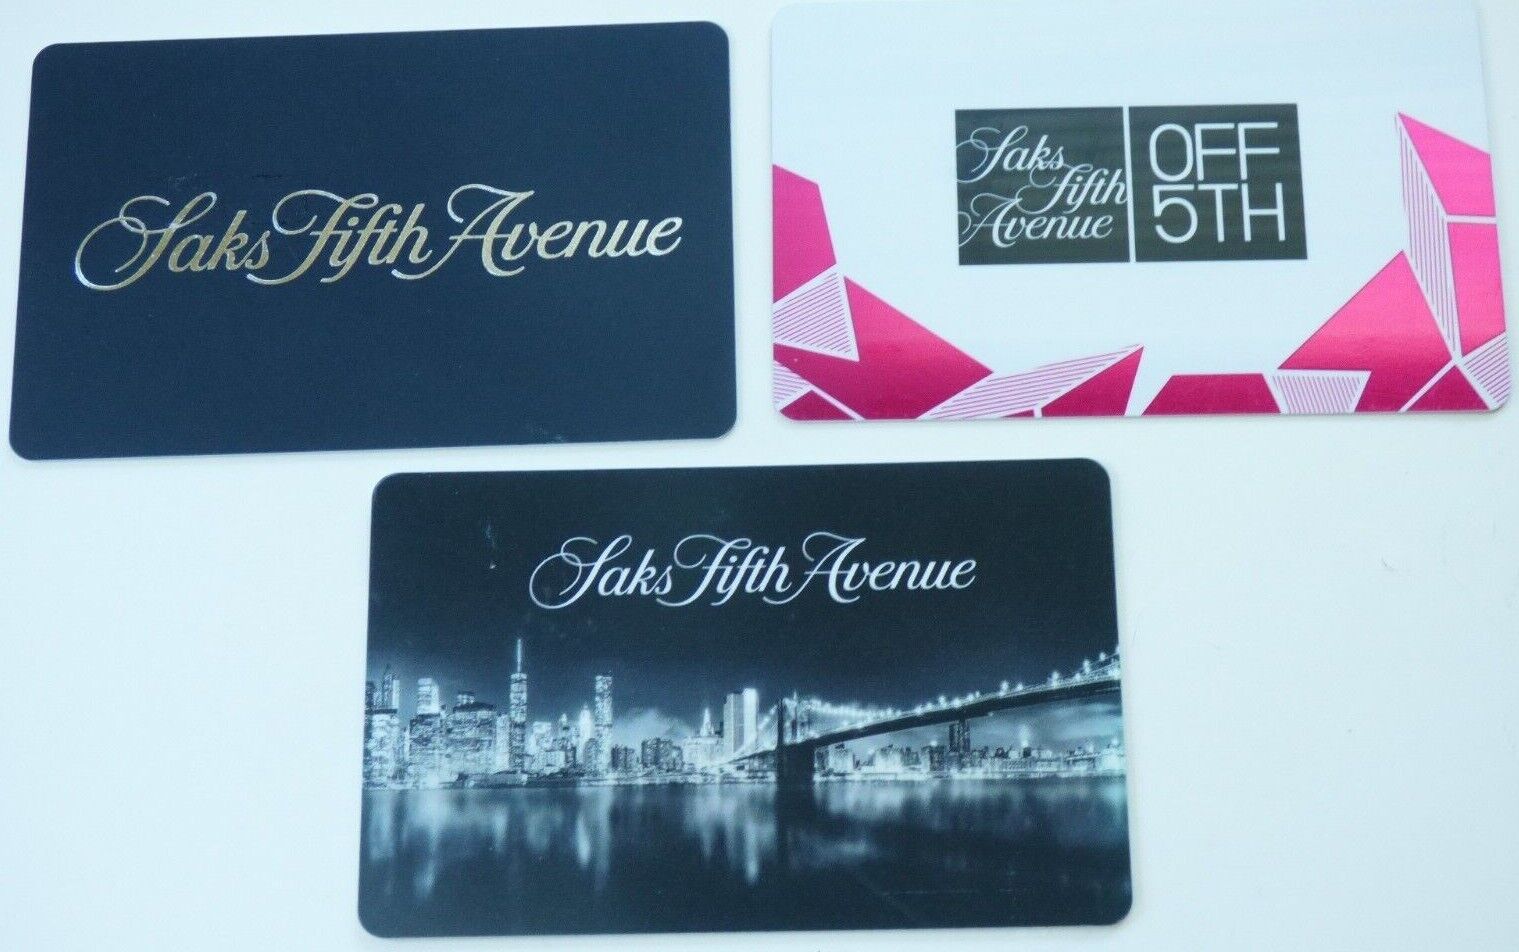 saks fifth avenue gift card